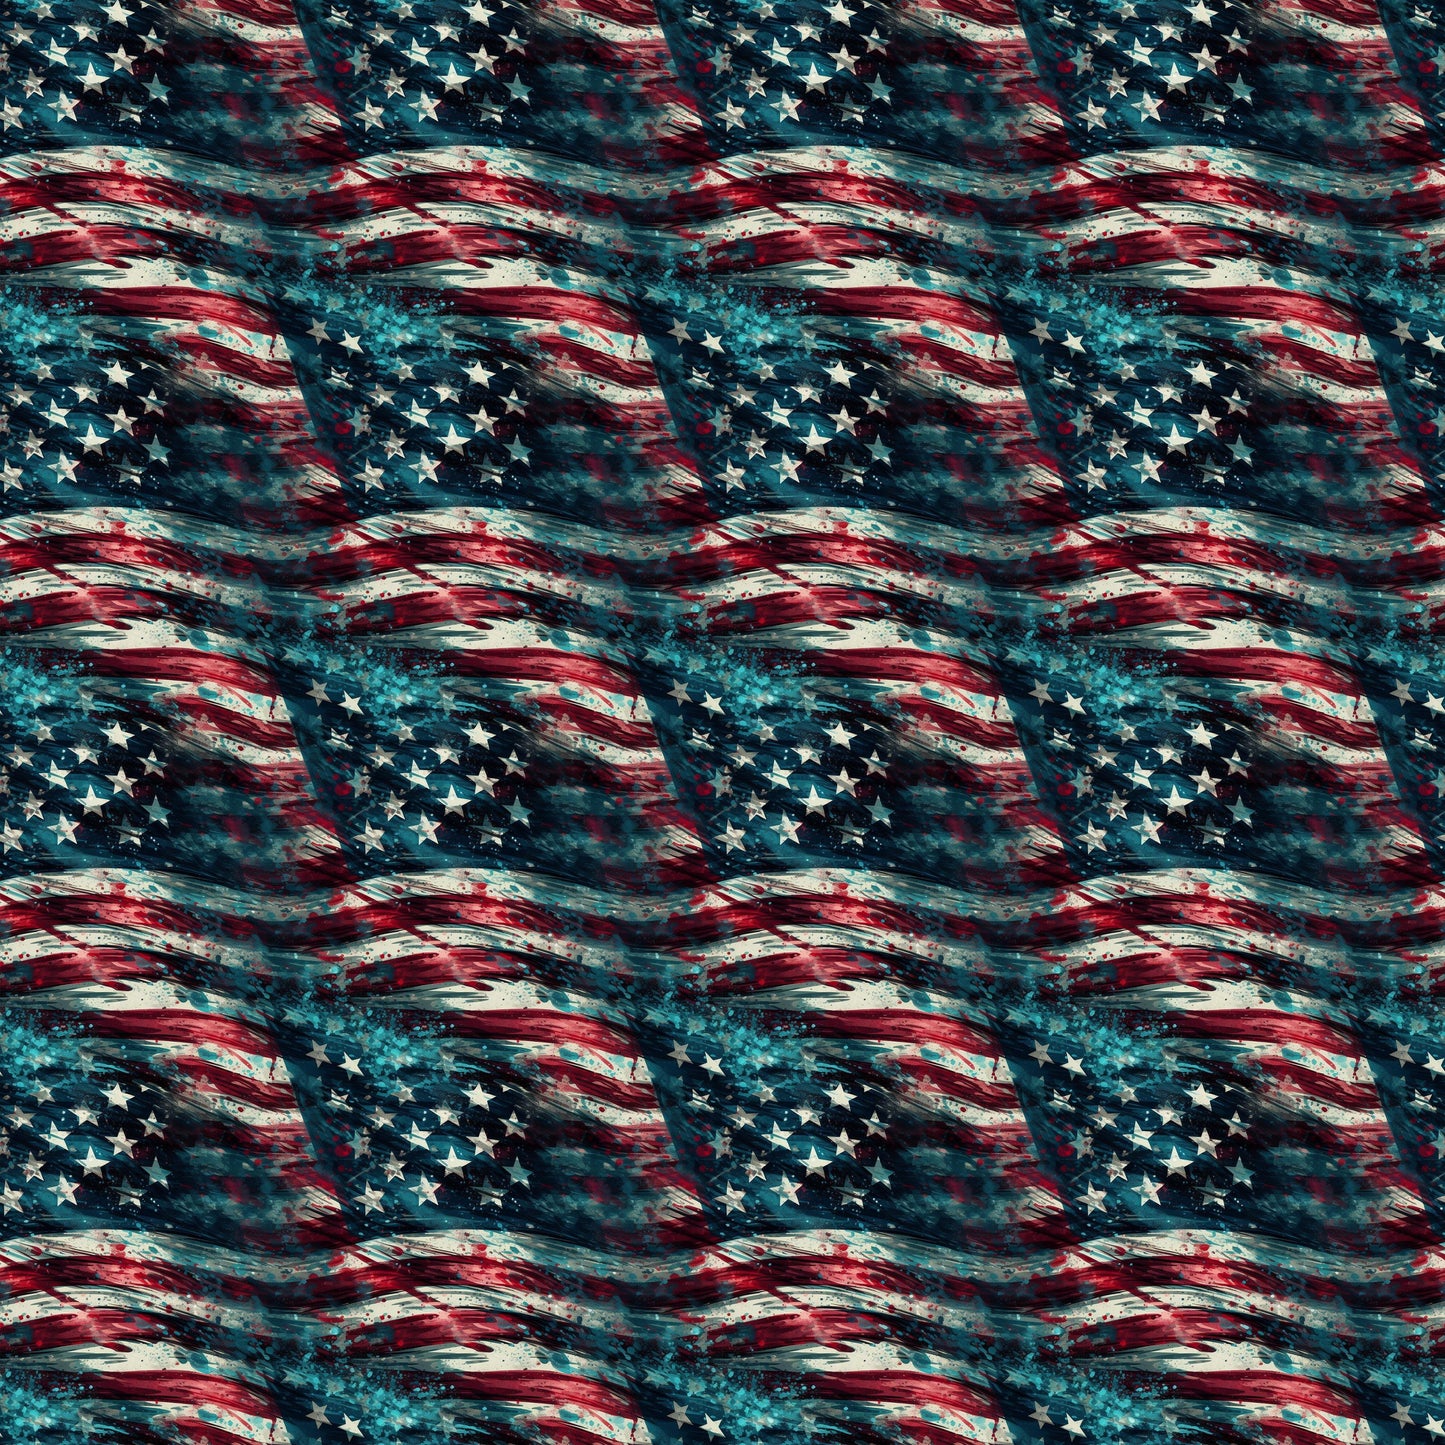 Distressed Flags 1 mil PUL Fabric - Made in the USA - Nature's Fabrics